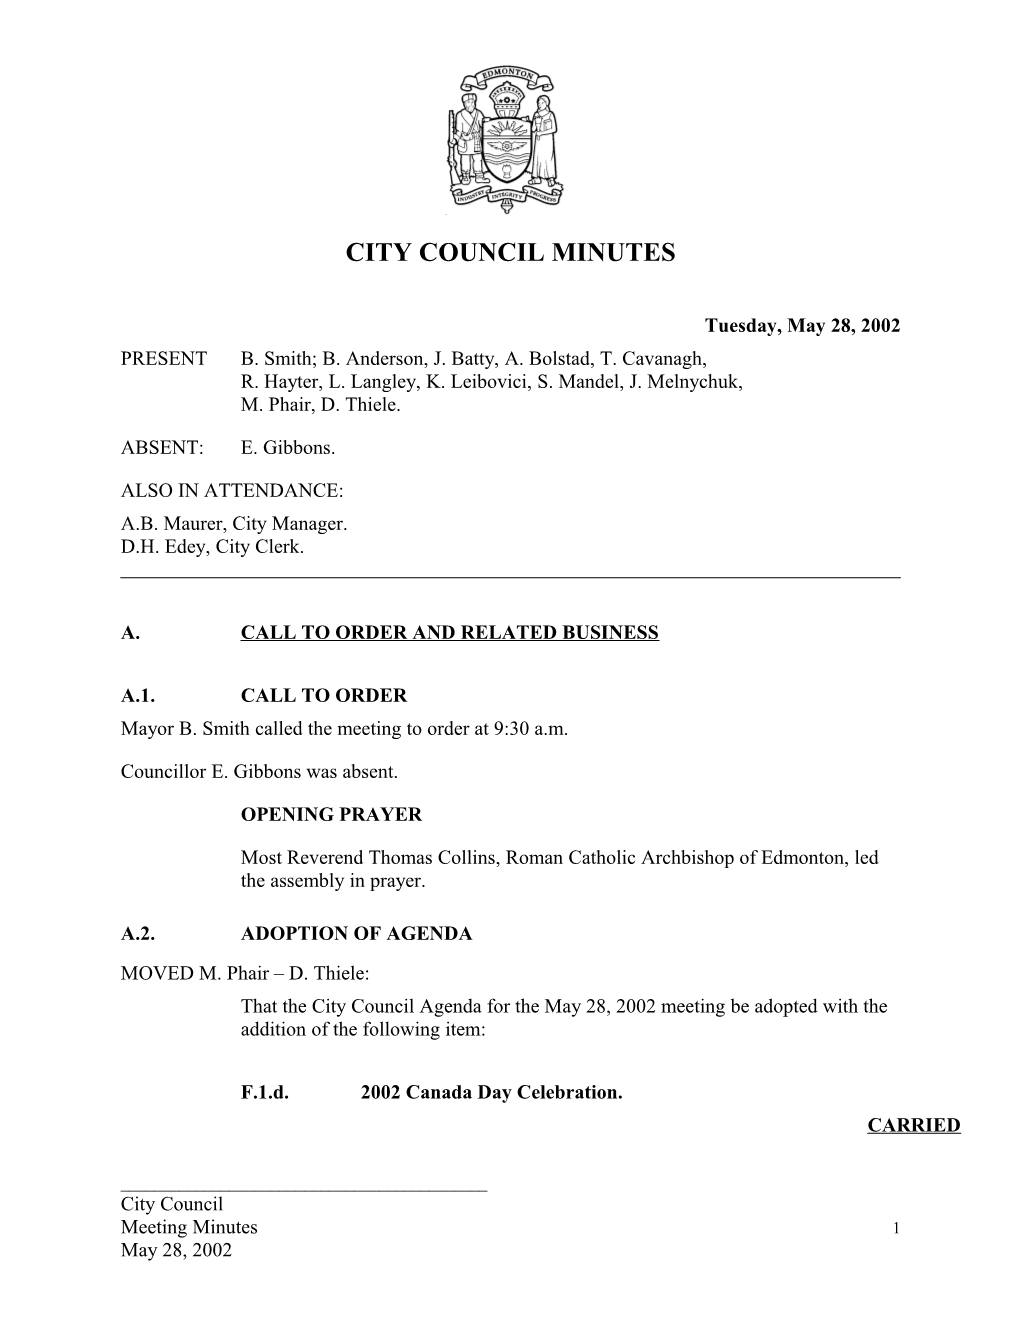 Minutes for City Council May 28, 2002 Meeting